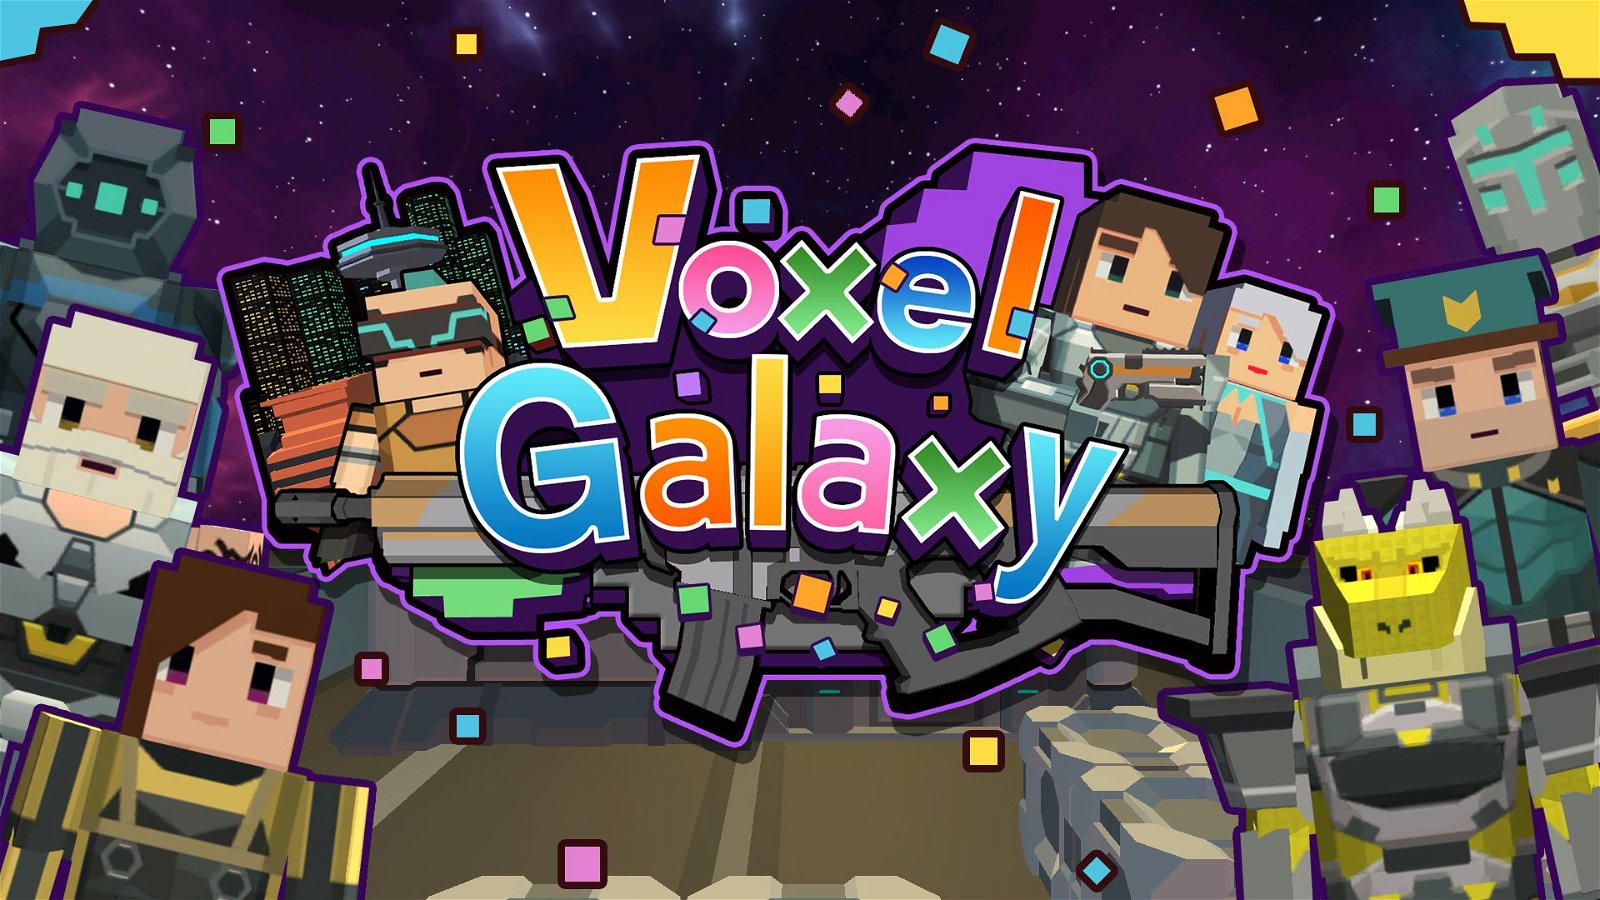 Image of Voxel Galaxy